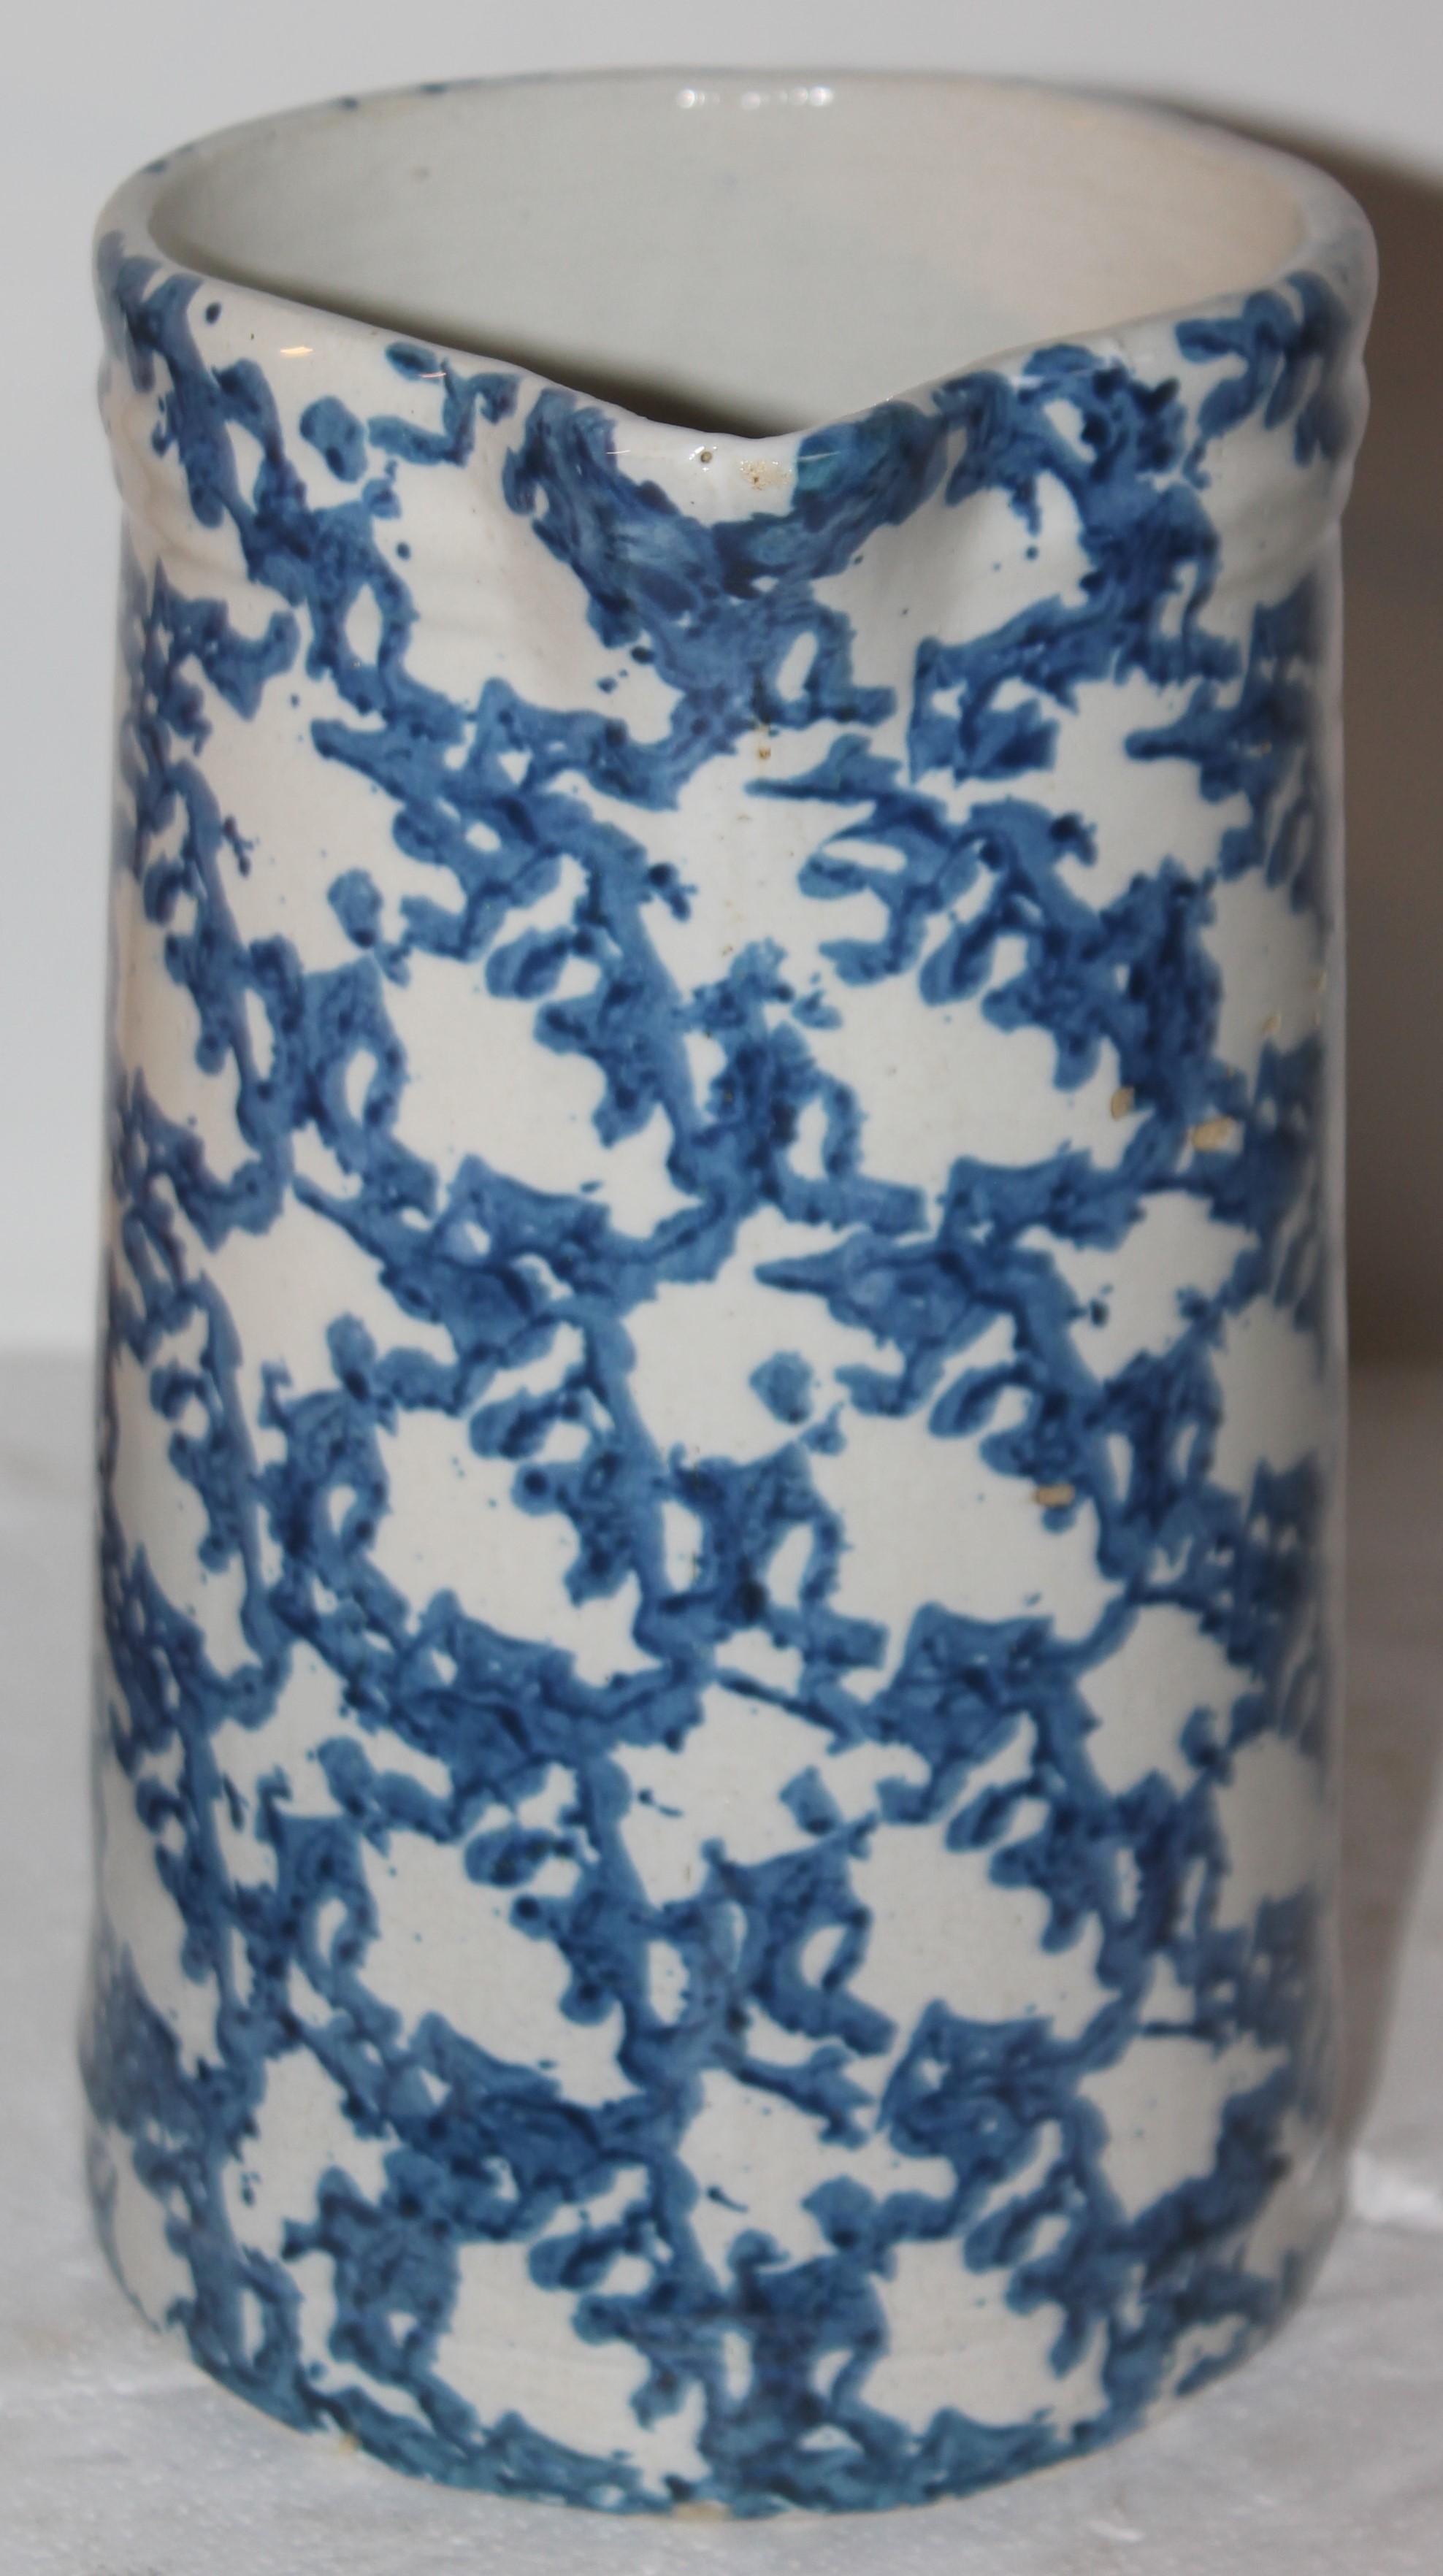 This 19thc blue & white sponge Ware pottery pitcher. The condition is very good.